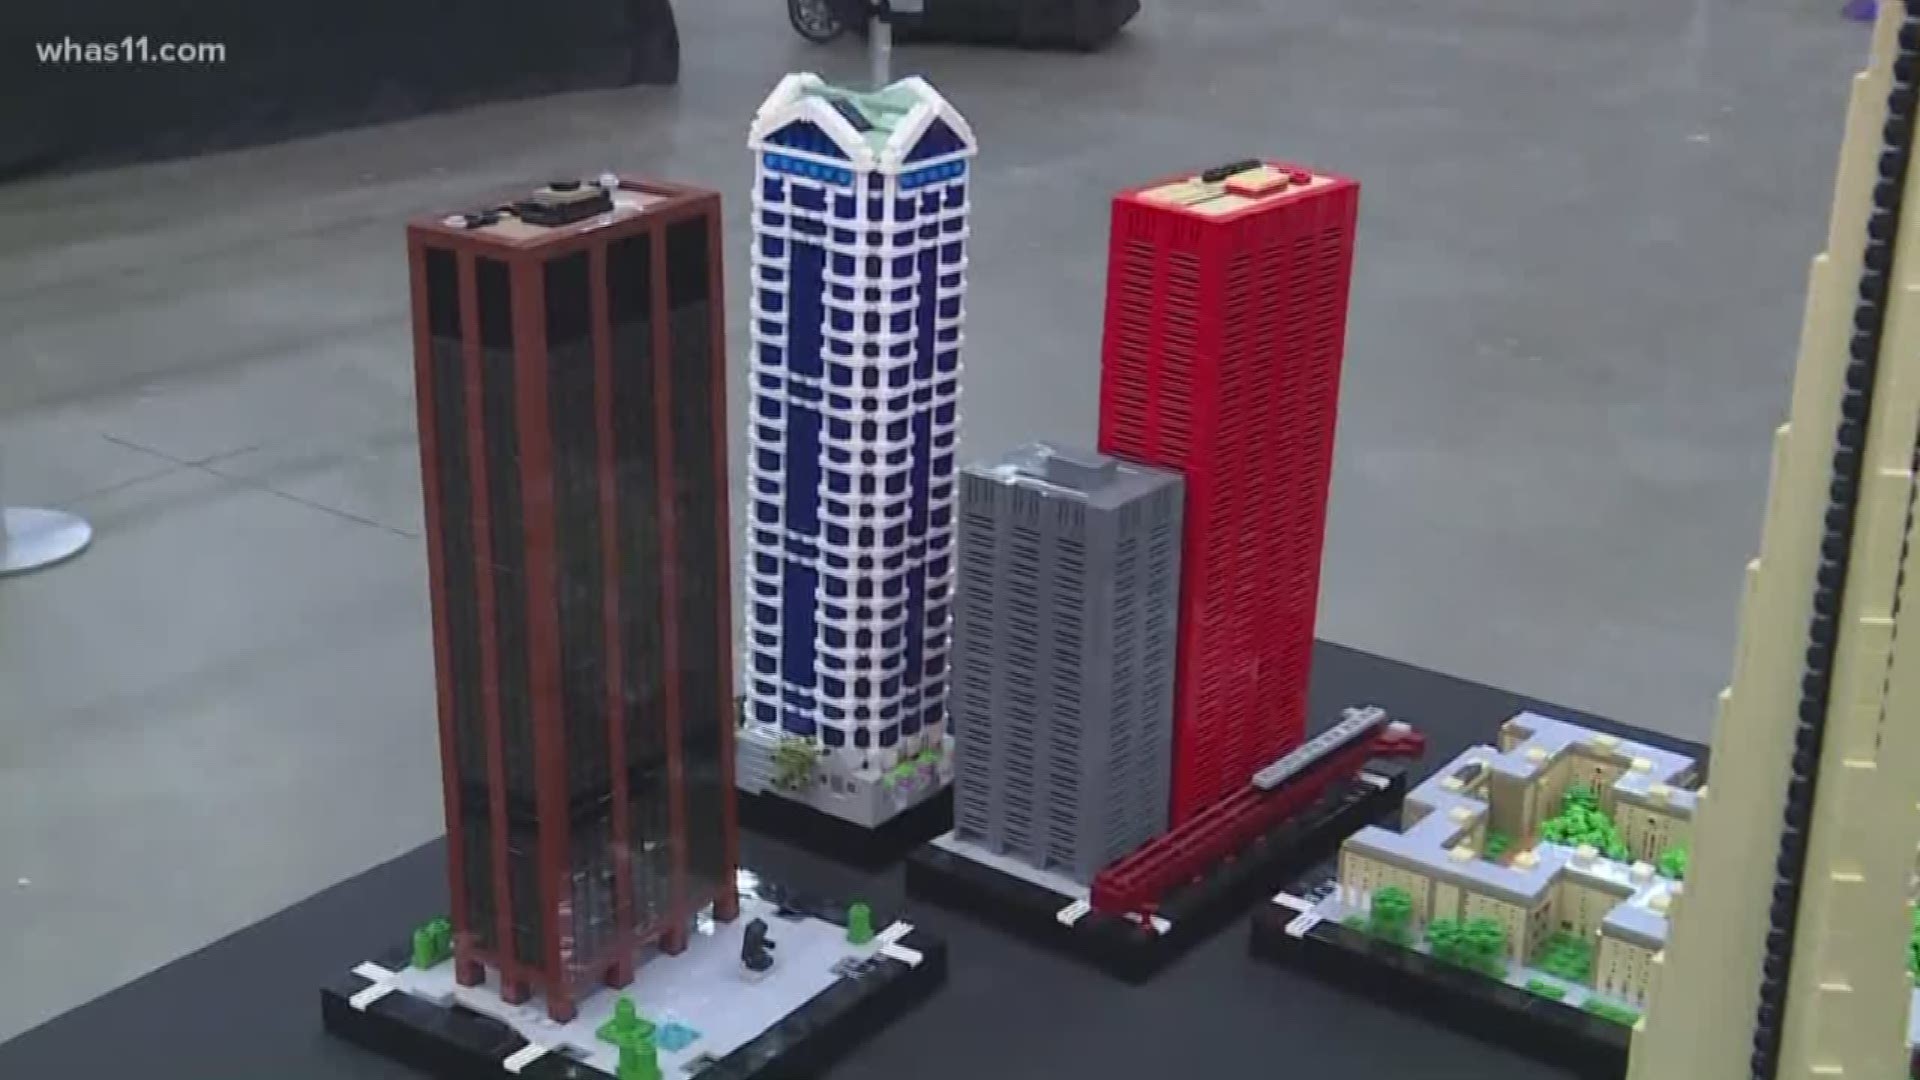 Lego Convention happening in Louisville